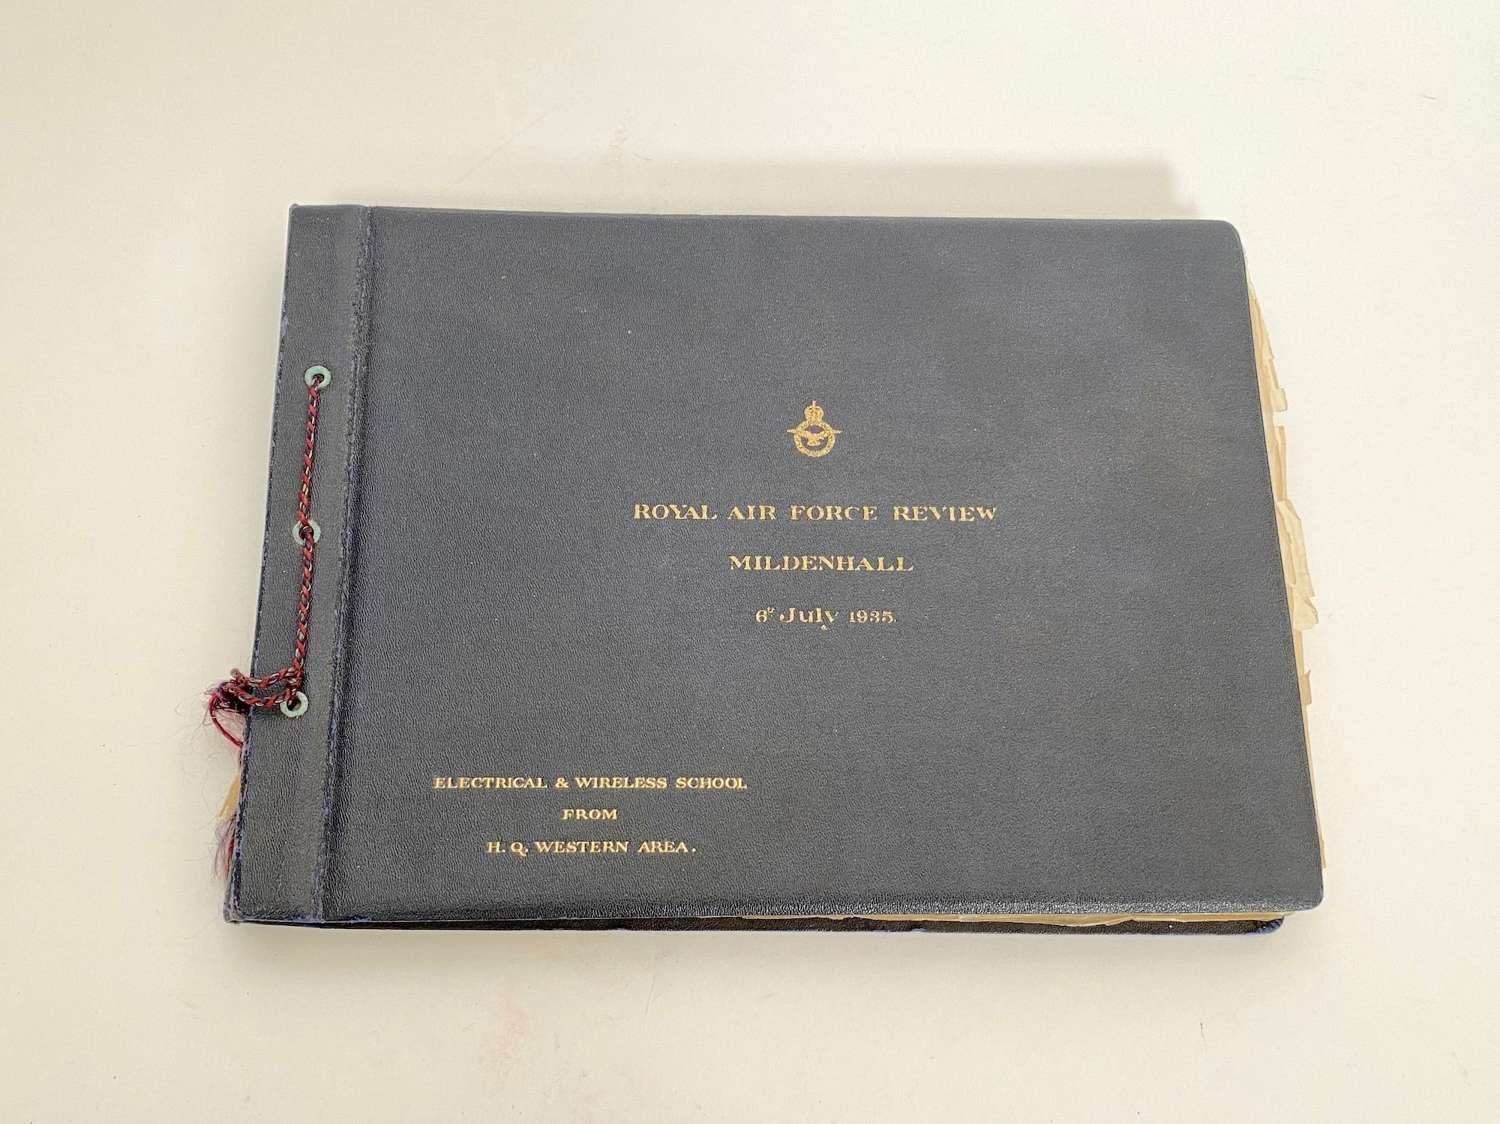 RAF Review Mildenhall 6th July 1935 Official Photograph Album.